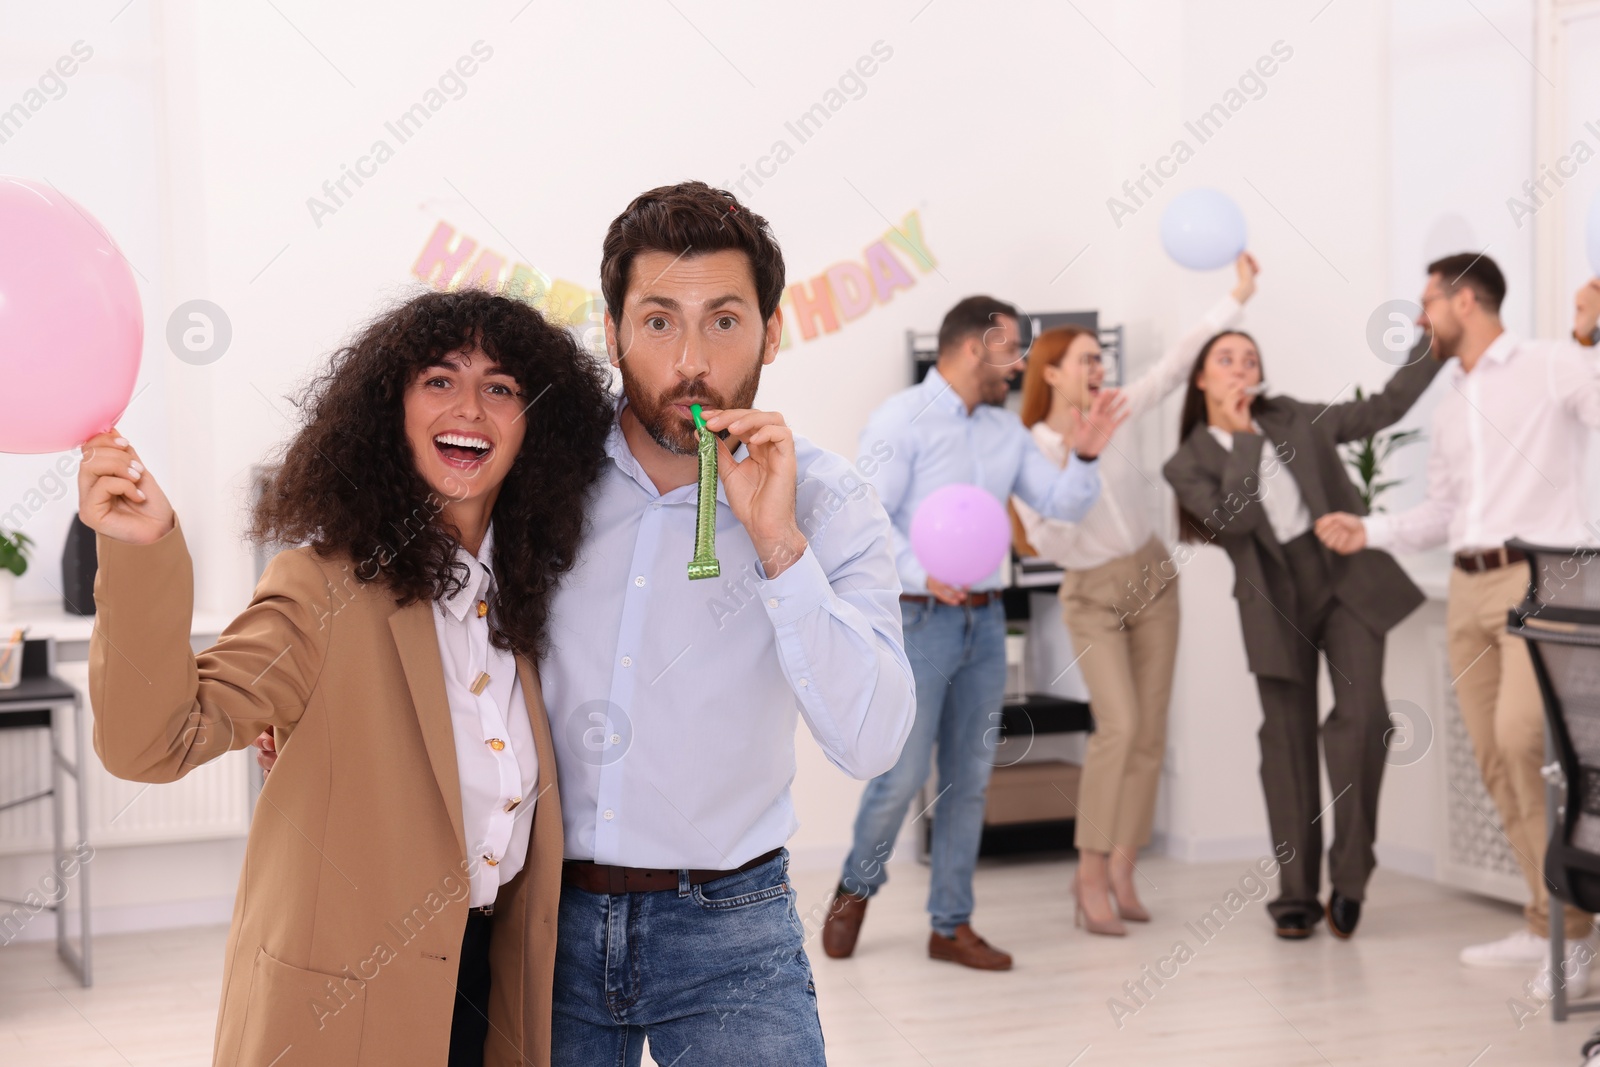 Photo of Coworkers having fun during office party indoors, space for text